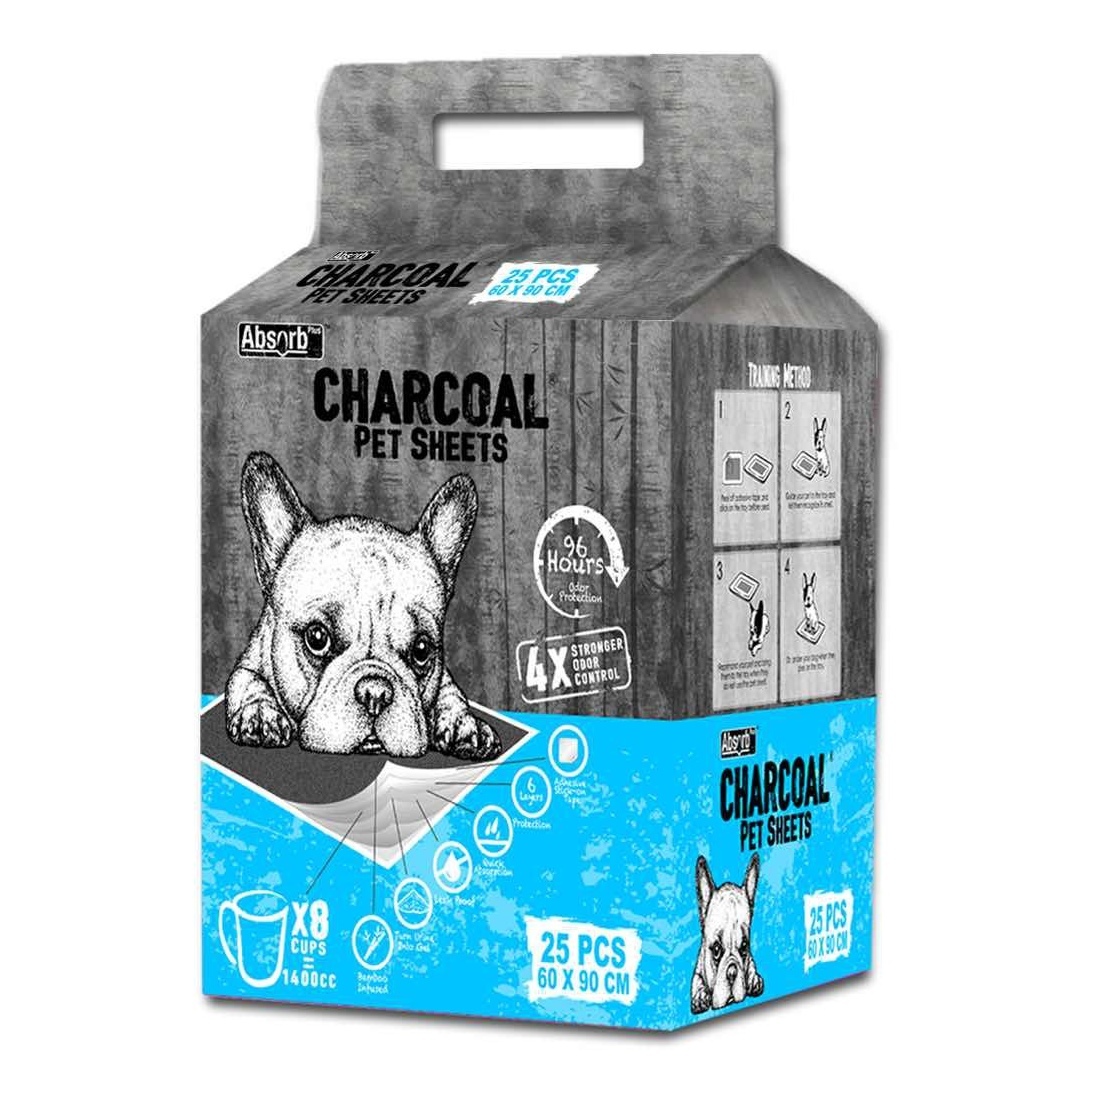 Absorb Plus - Charcoal Housebreaking & Toilet Training Pads for Dogs image 0